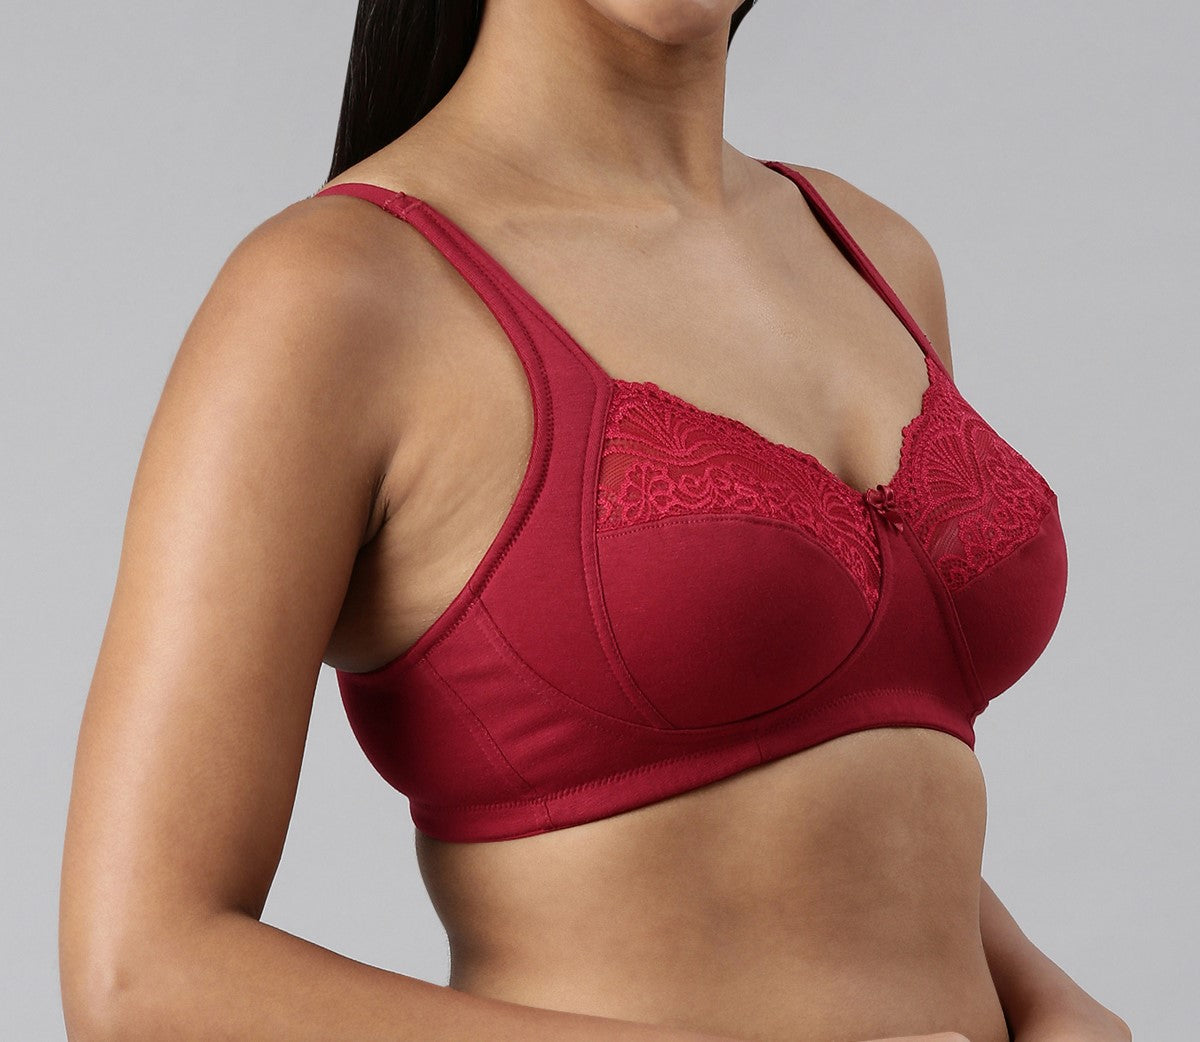 blossom-embrace-red wine4-support bra